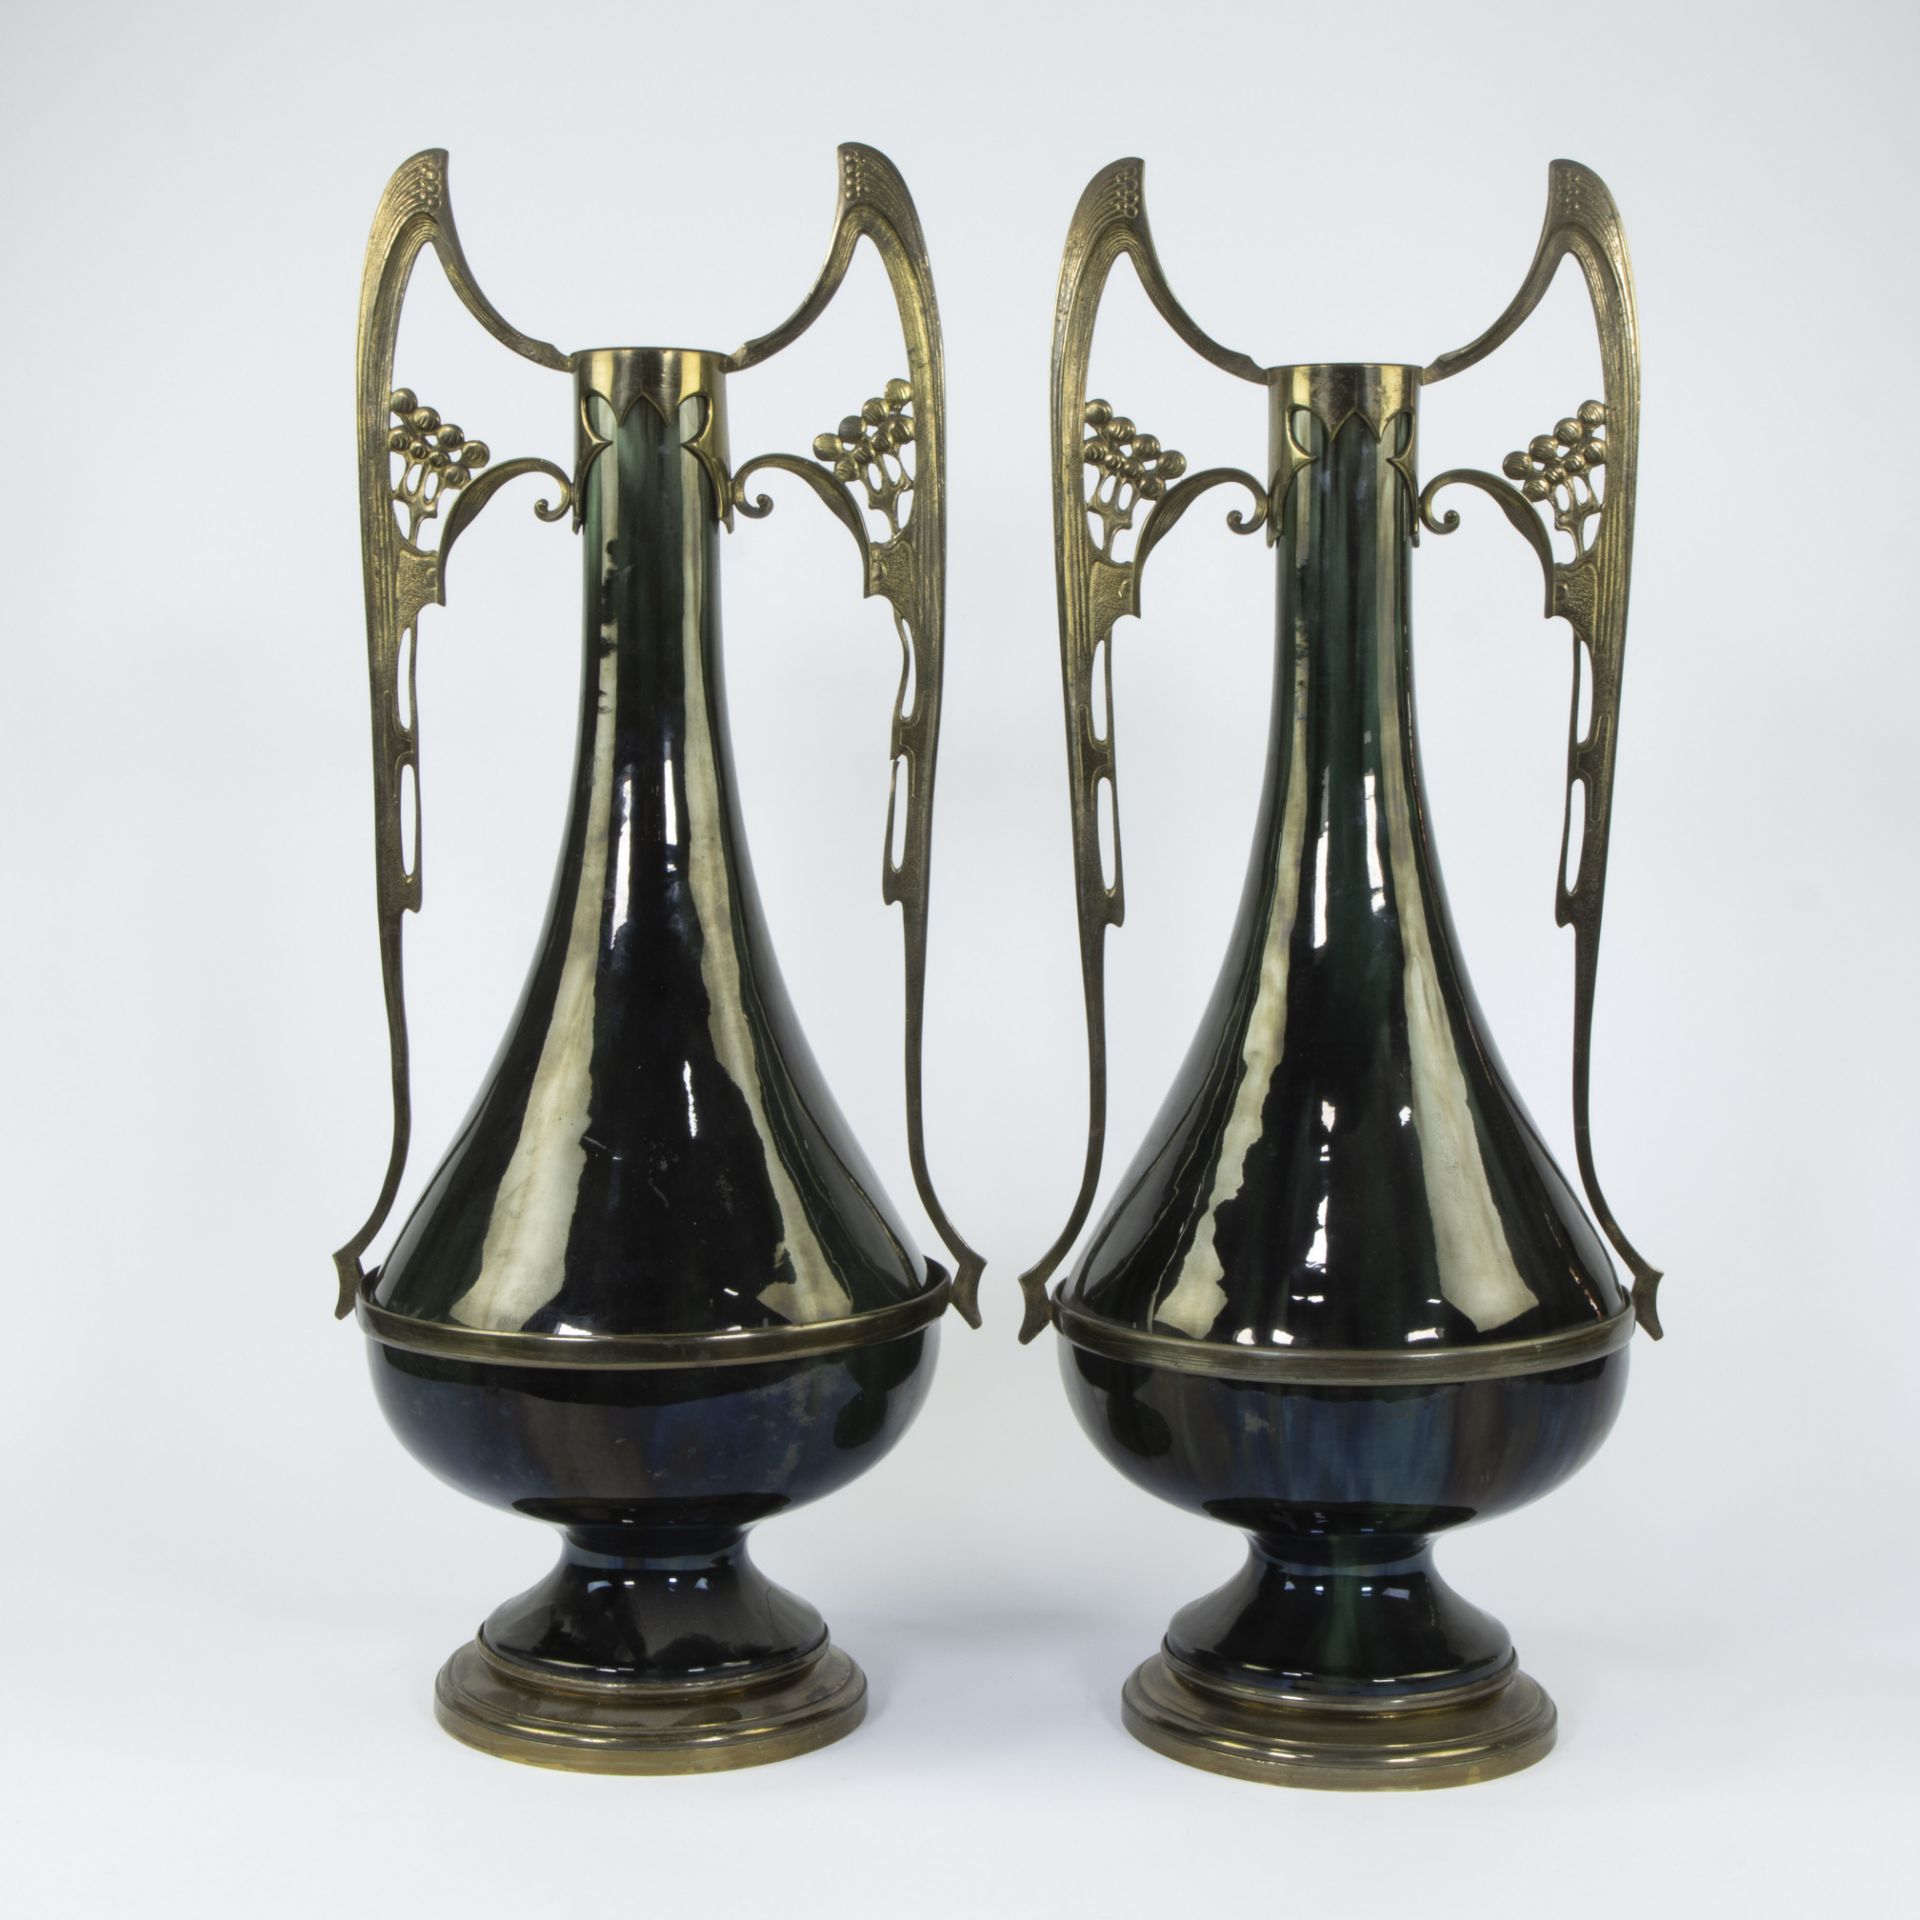 Couple Brussels Art Nouveau vase in ceramic with gilt brass, circa 1900 - Image 4 of 6